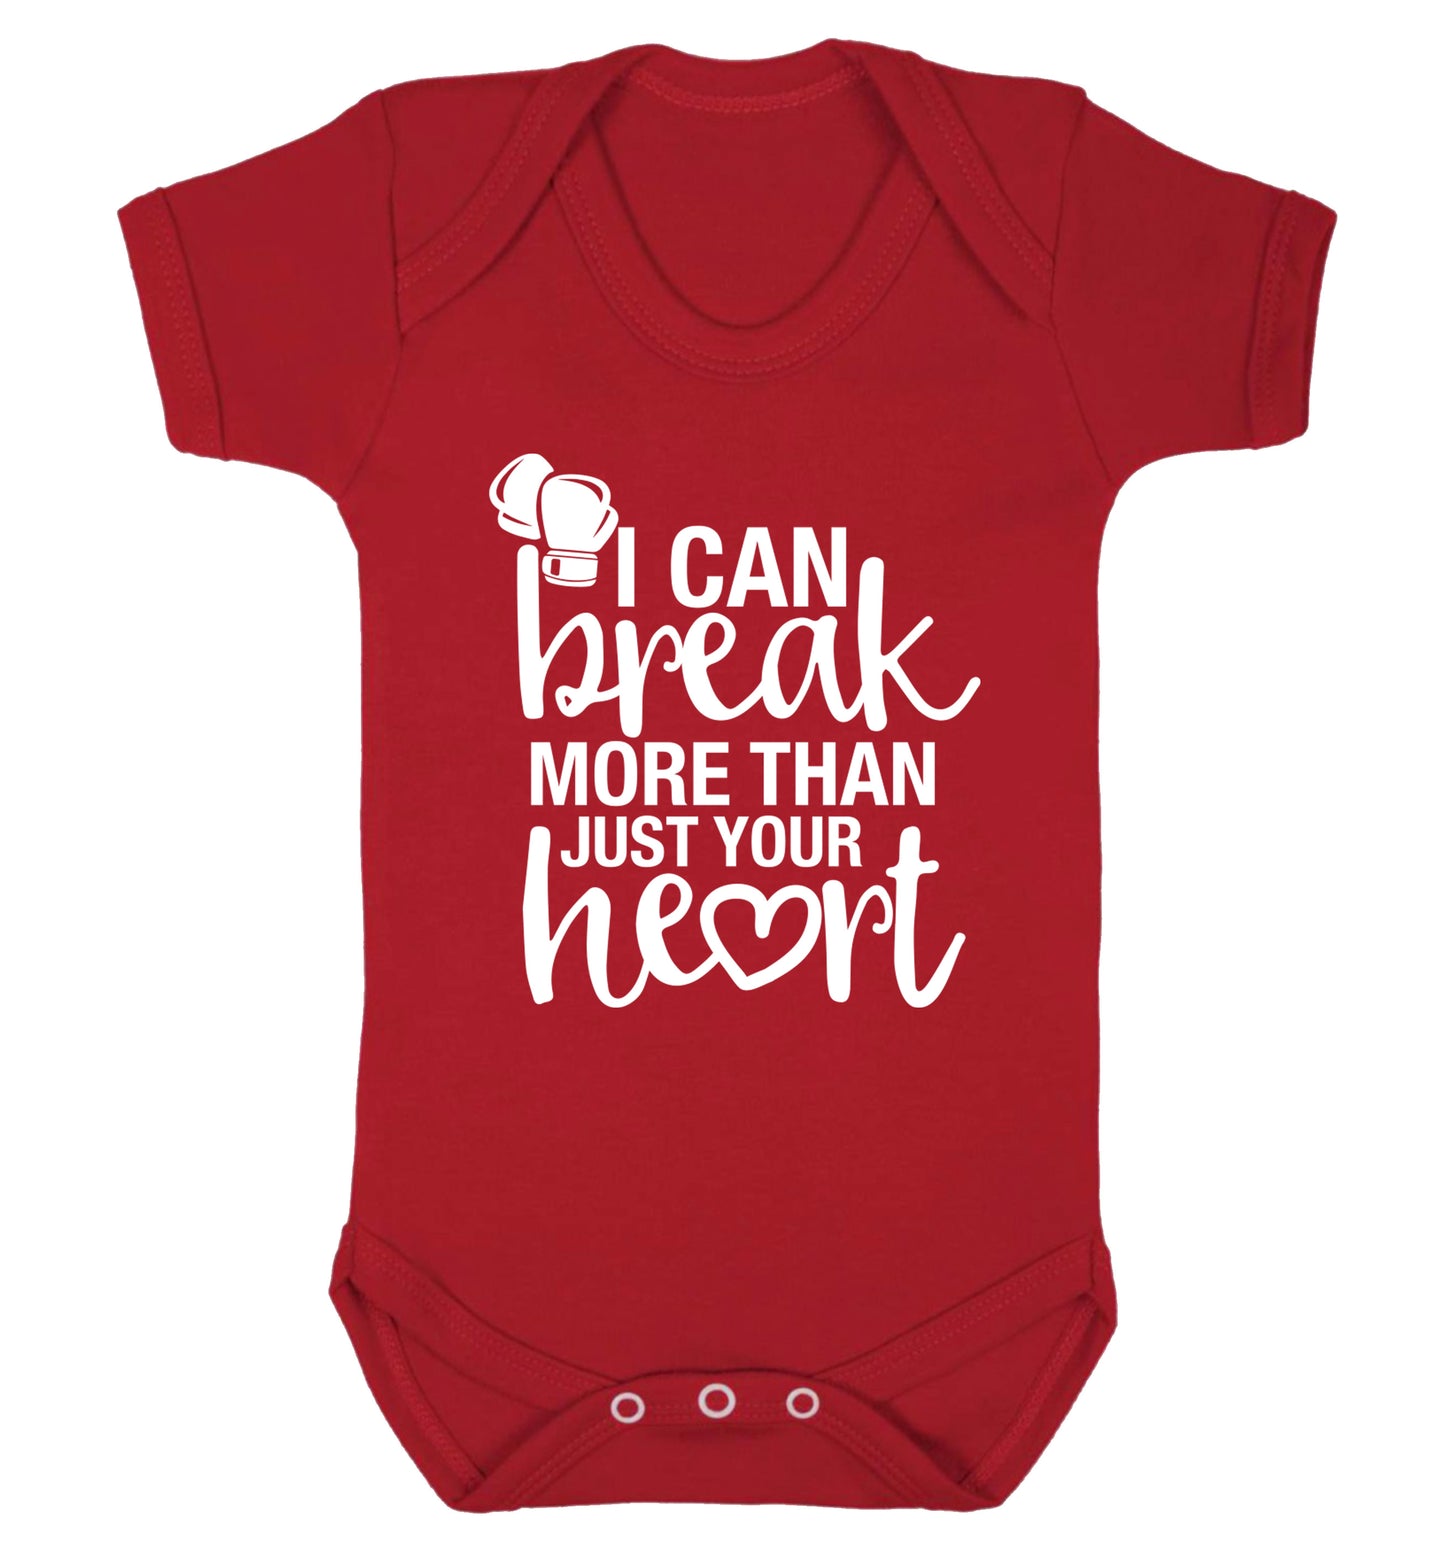 I can break more than just your heart Baby Vest red 18-24 months